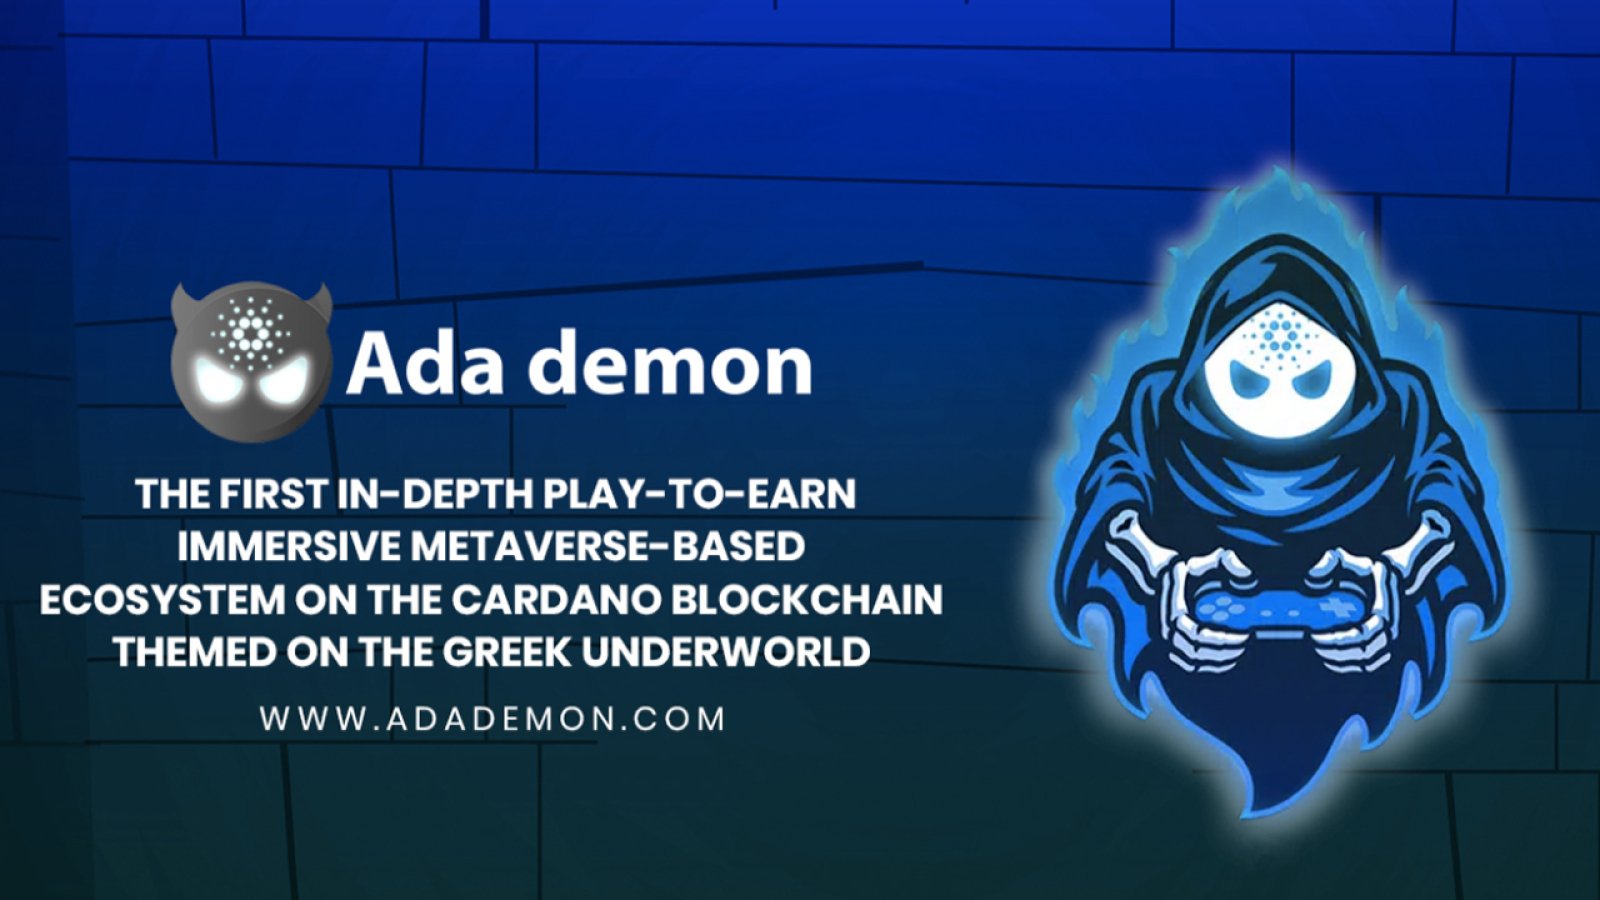 ADA Demon Takes Play-to-Earn Gaming to the Next Level